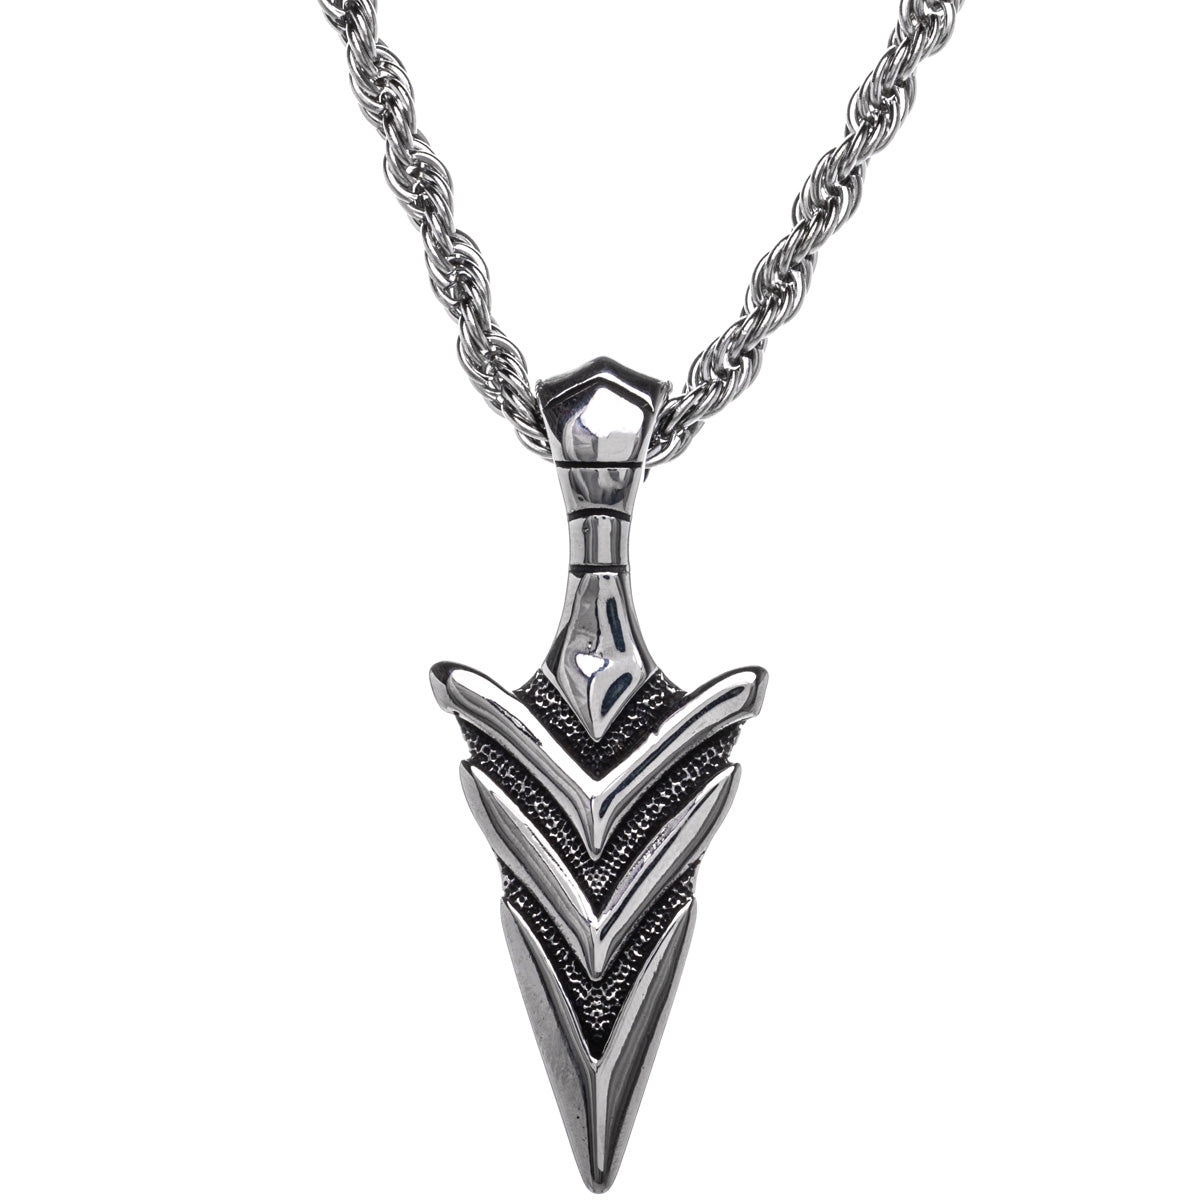 Pointed spear pendant necklace (Steel 316L)